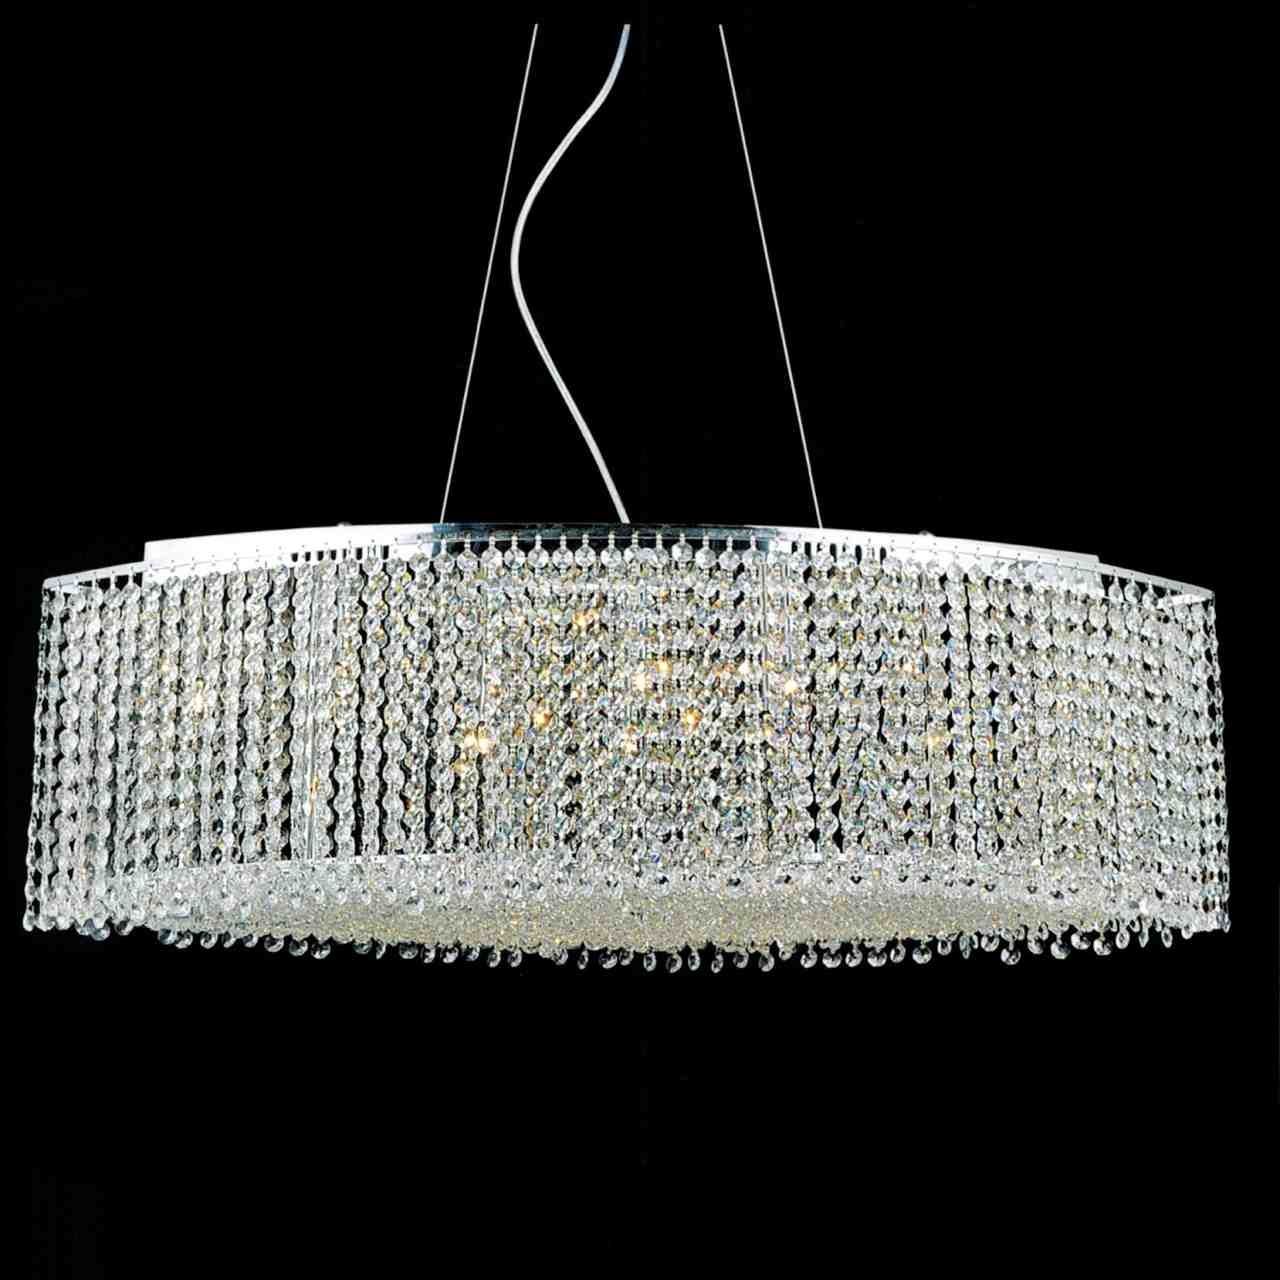 Brizzo Lighting Stores 35 Rainbow Modern Linear Crystal Regarding Chrome Crystal Chandelier (View 10 of 12)